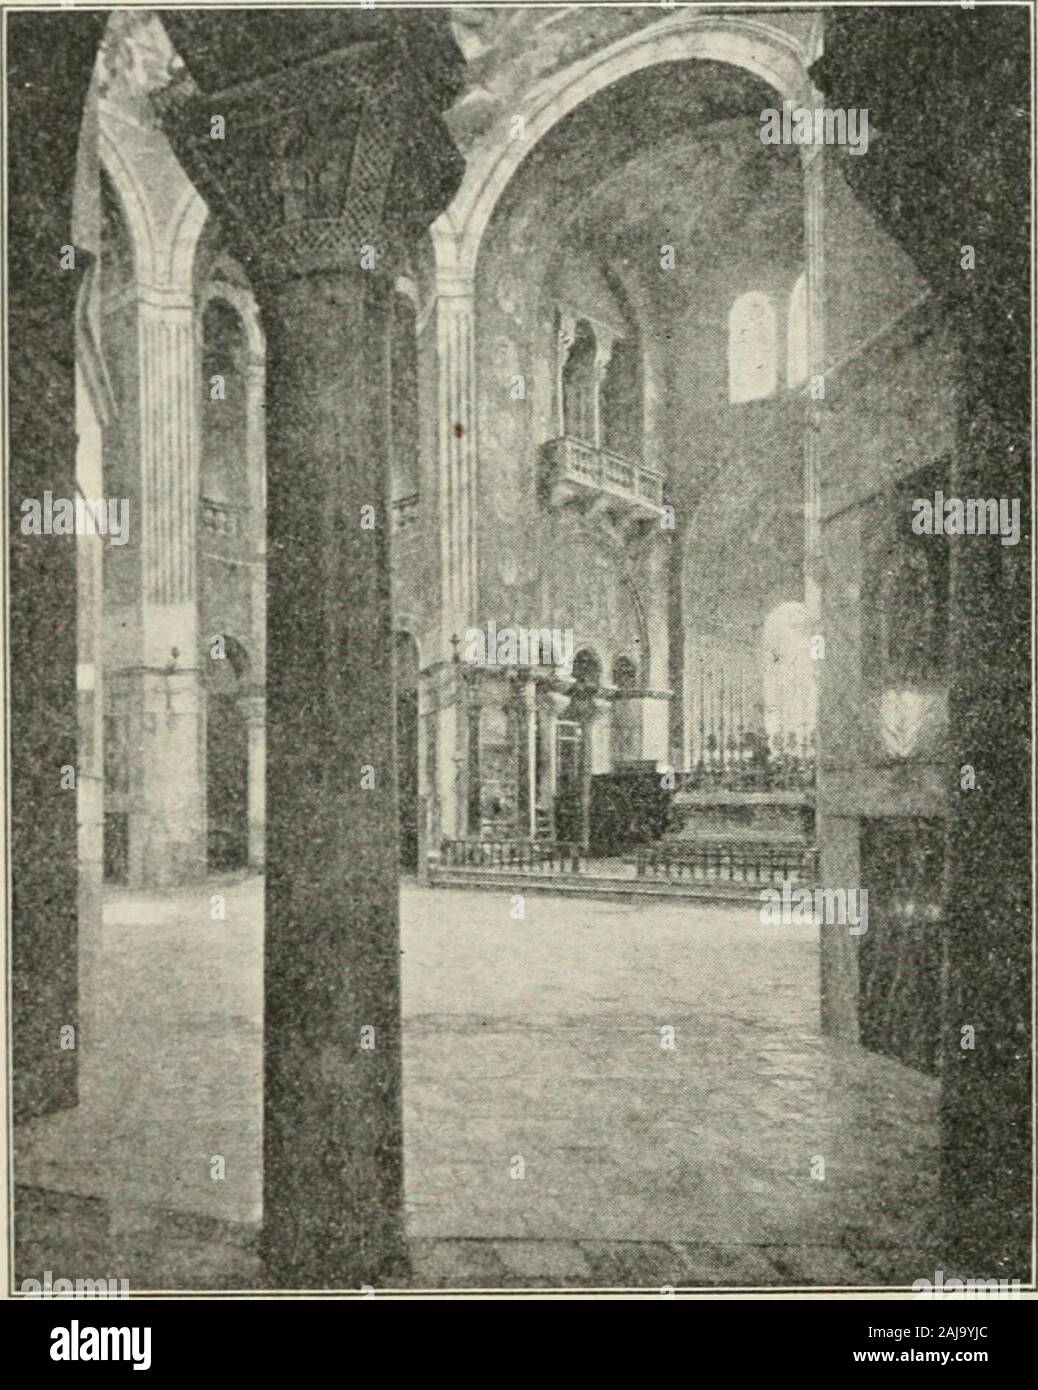 Monuments of the early church . ially the same constructive scheme is repeated in SS.Sergius and Bacchus at Constantinople (Fig. 47), which was built about thesame time. Avery differenteffect is pro-duced, however,by a change ina feature whichis almost purelydecorative, name-ly, in the niches.The niche oppo-site the apse andthe central nicheon either side ofthis line weresuppressed bysimply carryingthe row of col-umns straightacross from pillarto pillar, with theconsequence ofgiving the rooma distinct longi-tudinal direction,and of permitting the inclusion of the whole room within aquadrangula Stock Photo